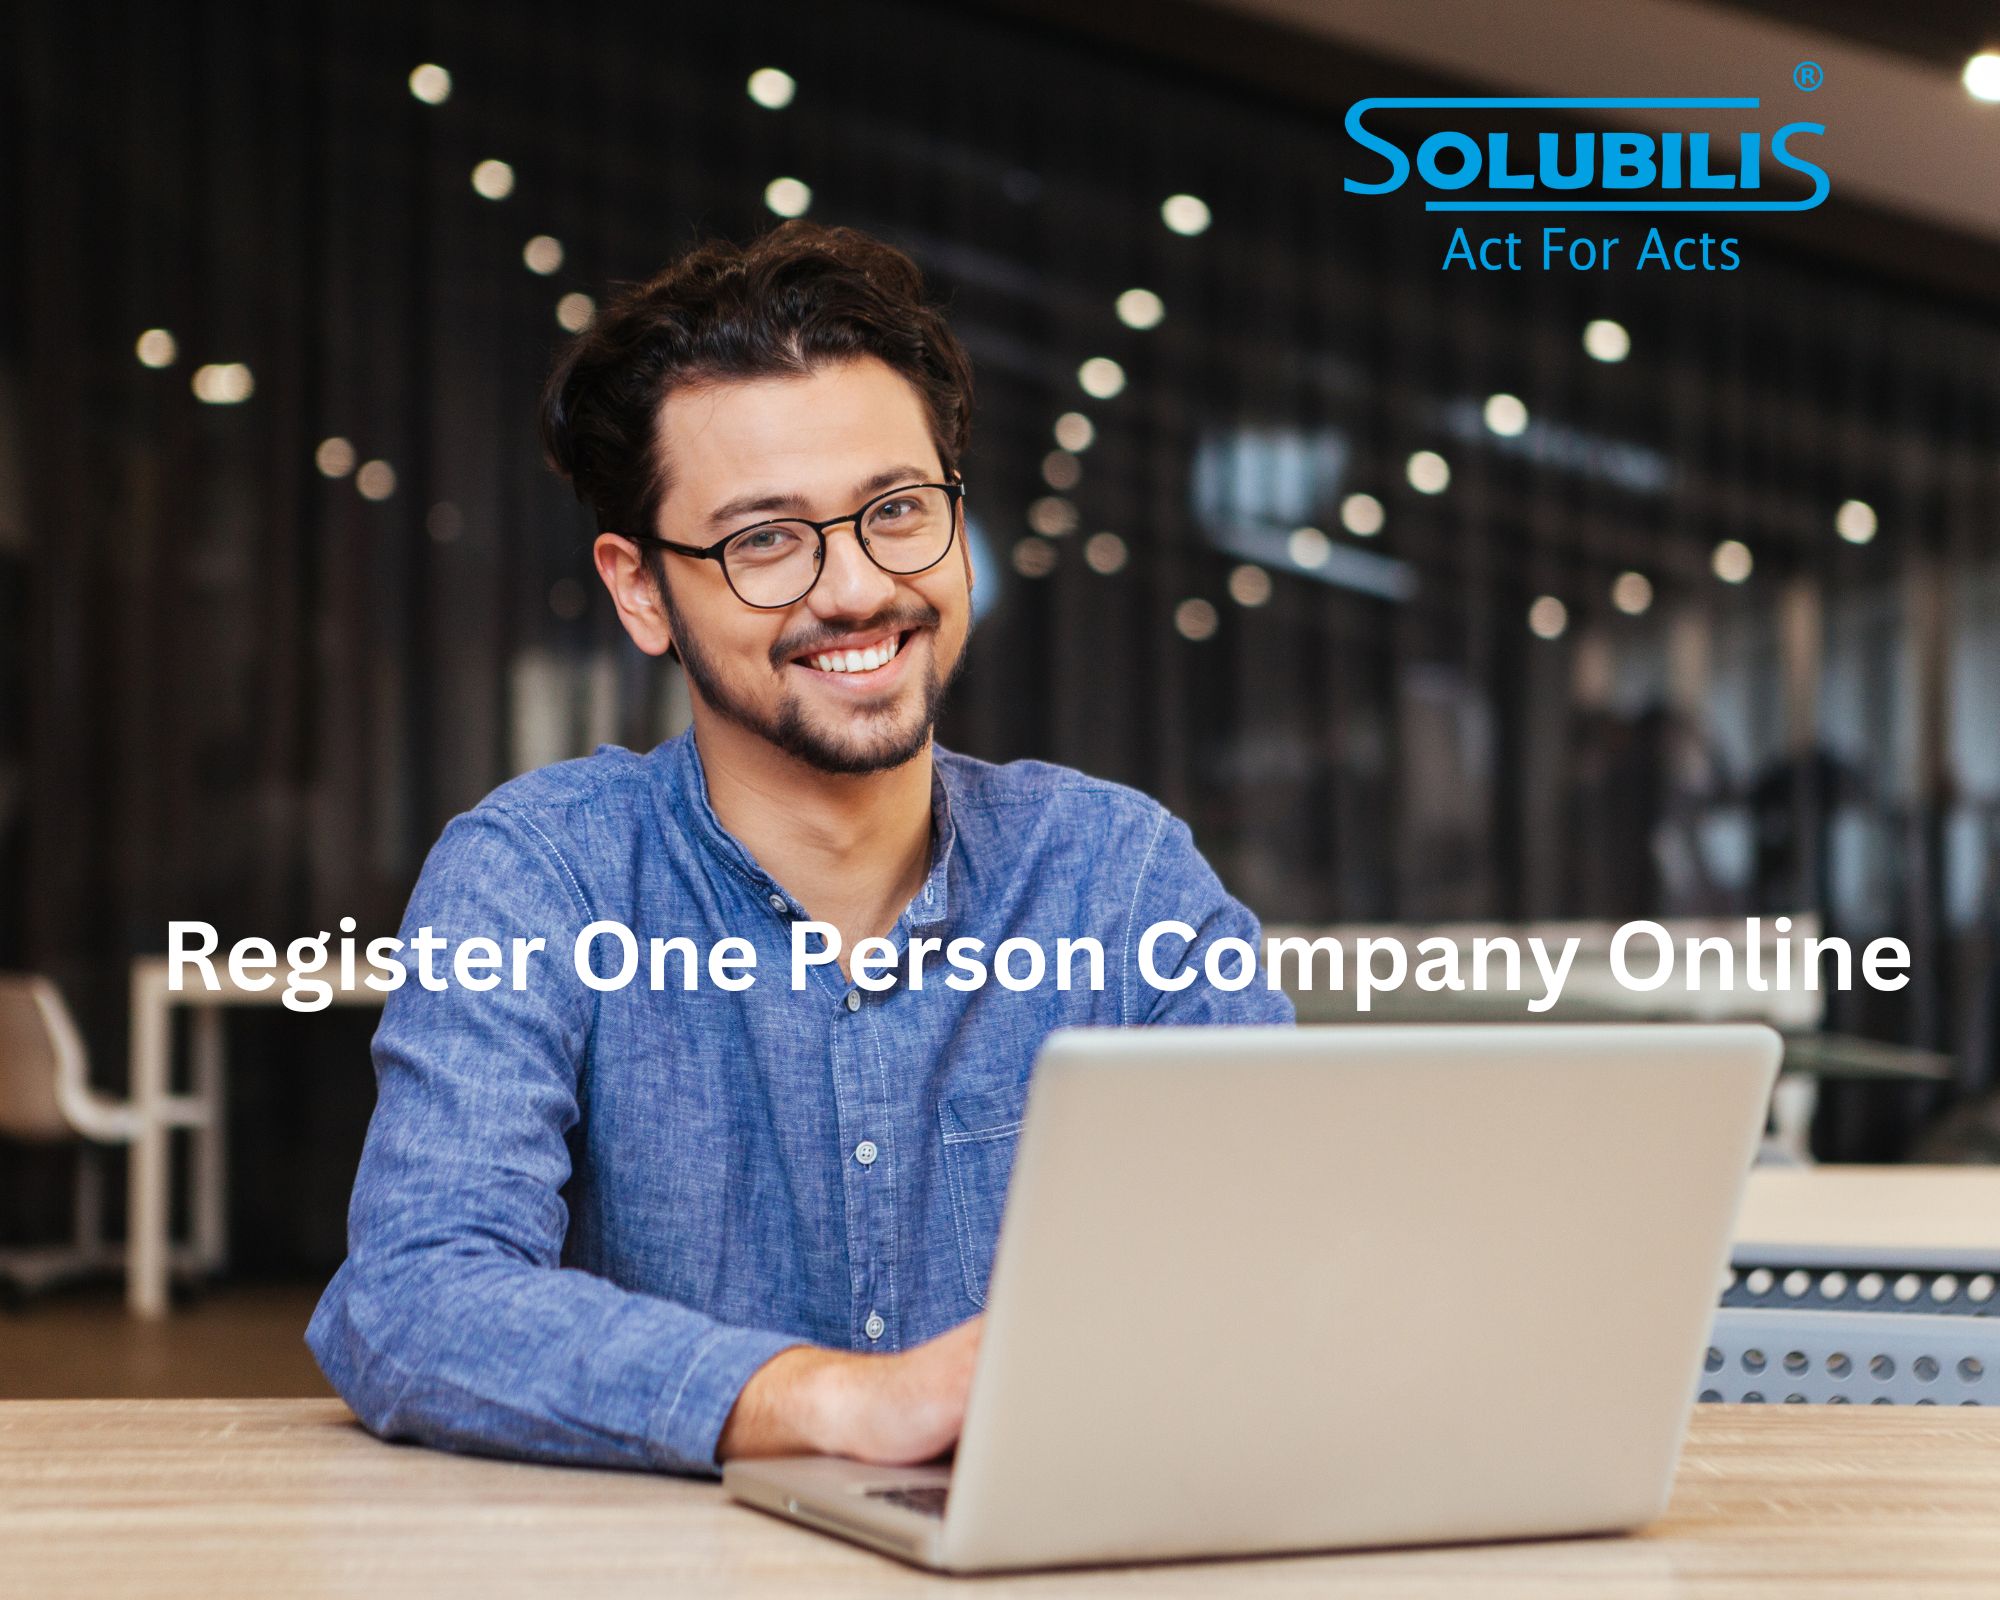 OPC registration in Bangalore